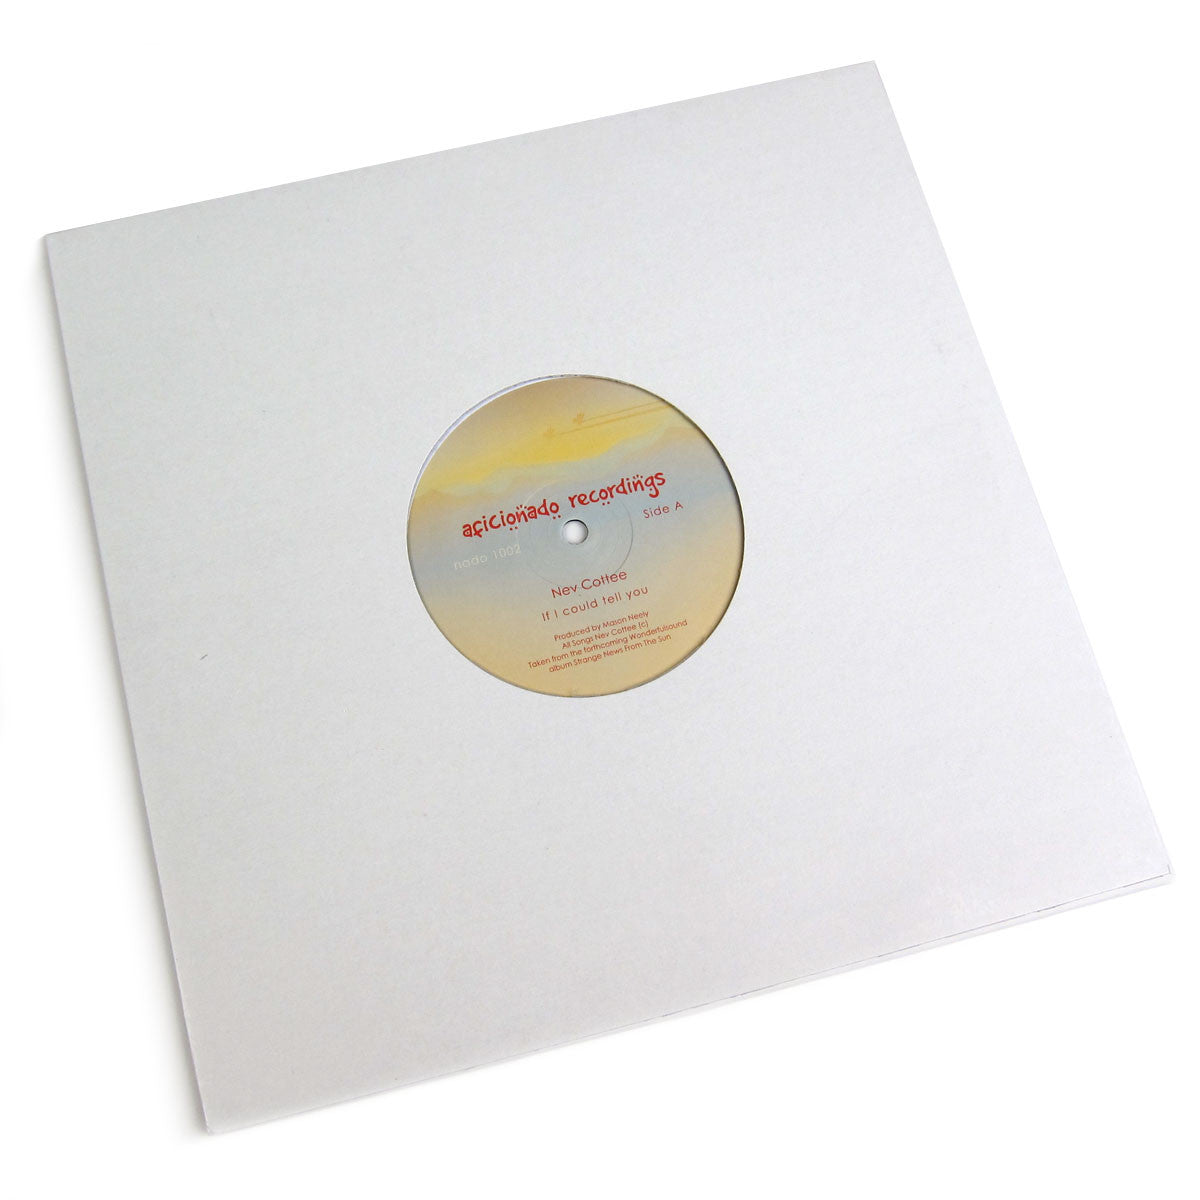 Nev Cottee: If I Could Tell You Vinyl 10